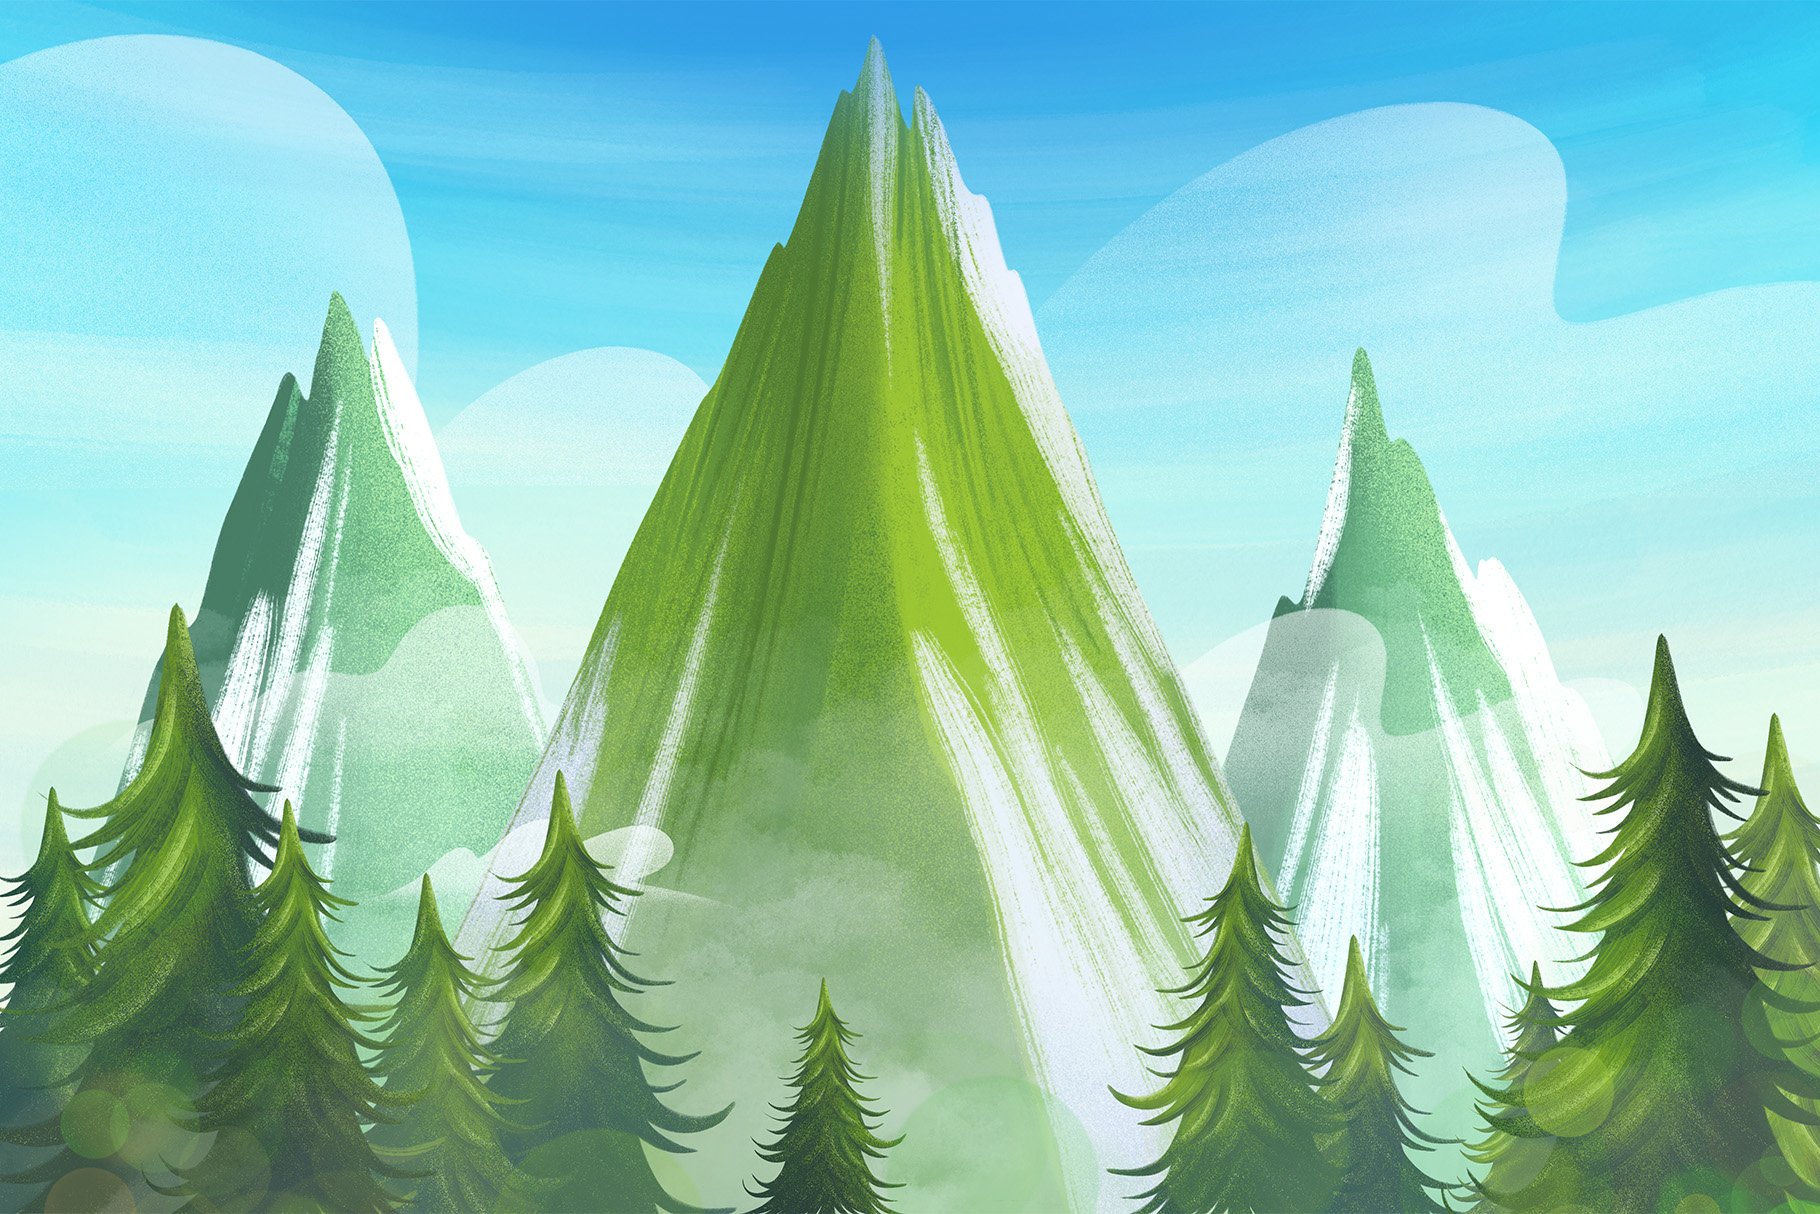 DB Fighter Z Mountain Background Pack